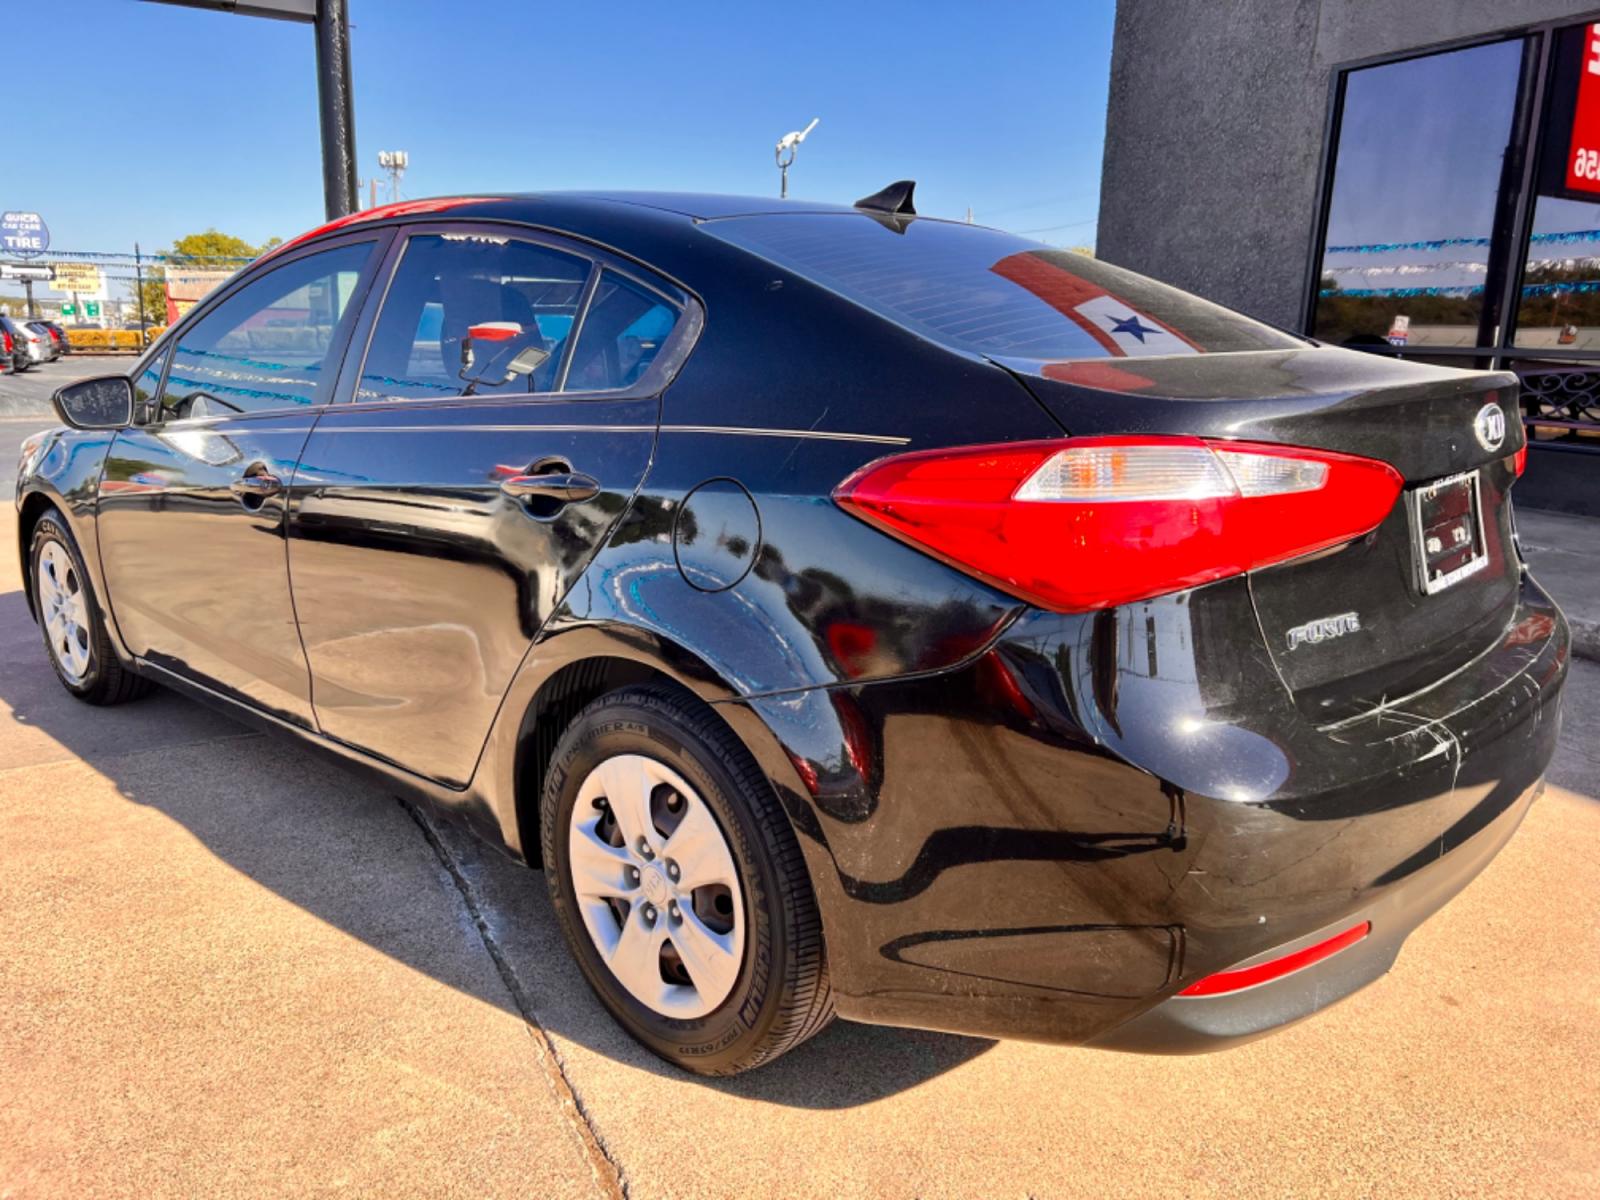 2016 BLACK KIA FORTE LX (KNAFK4A61G5) , located at 5900 E. Lancaster Ave., Fort Worth, TX, 76112, (817) 457-5456, 0.000000, 0.000000 - Cash CASH CAR ONLY, NO FINANCING AVAILABLE. THIS 2016 KIA FORTE LX 4 DOOR SEDAN RUNS AND DRIVES GREAT. IT IS EQUIPPED WITH A CD PLAYER, AM/FM RADIO AND AN AUX PORT. THE TIRES ARE IN GOOD CONDITION AND STILL HAVE TREAD LEFT ON THEM. THIS CAR WILL NOT LAST SO ACT FAST! Call or text Frances a - Photo #4